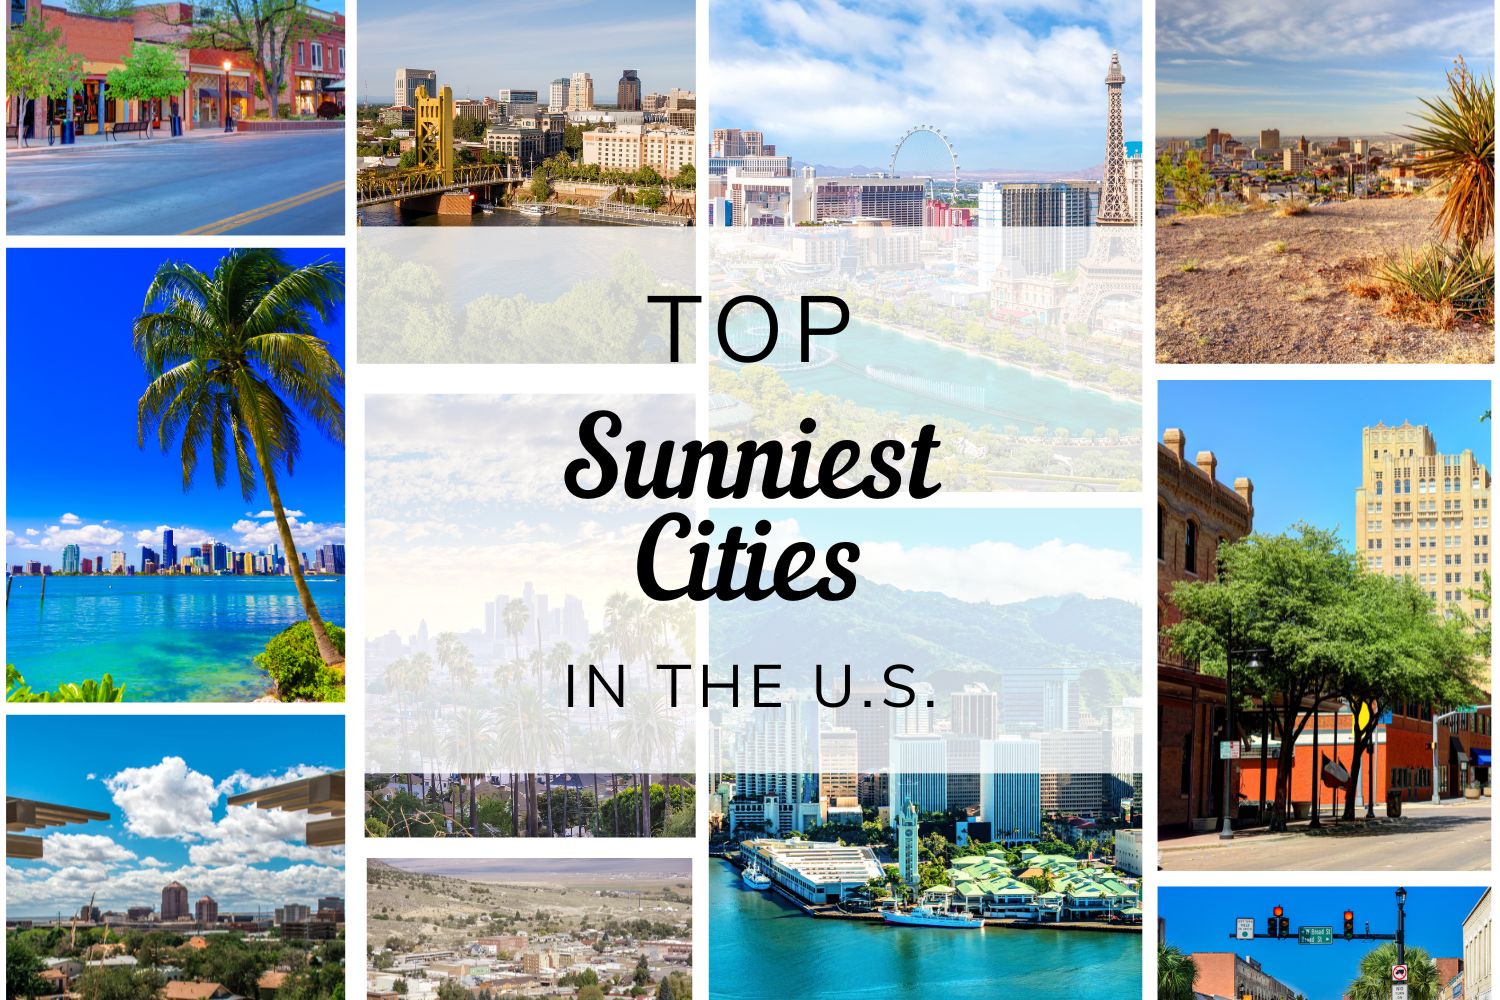 Collage of photos showing some of the top sunniest cities in the United States